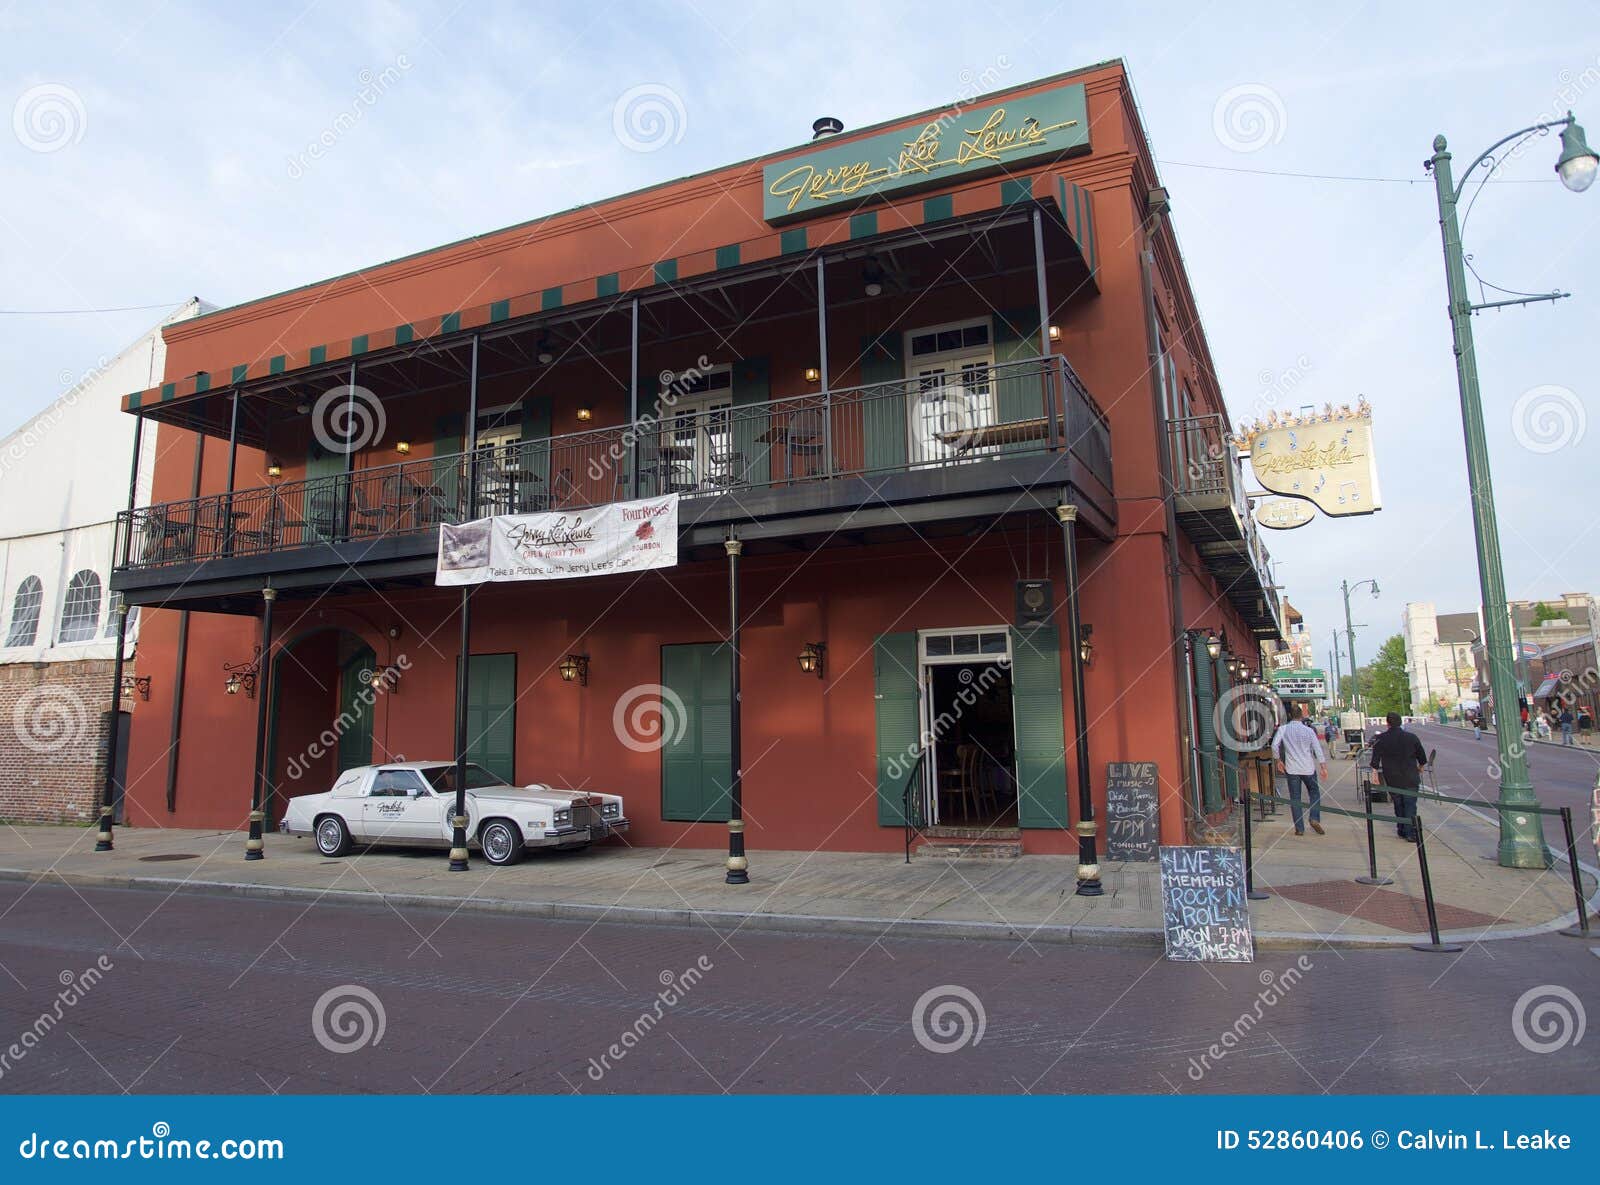 Jerry Lee Lewis S Honky Tonk Cafe. Editorial Photo - Image of store,  lettuce: 52860406